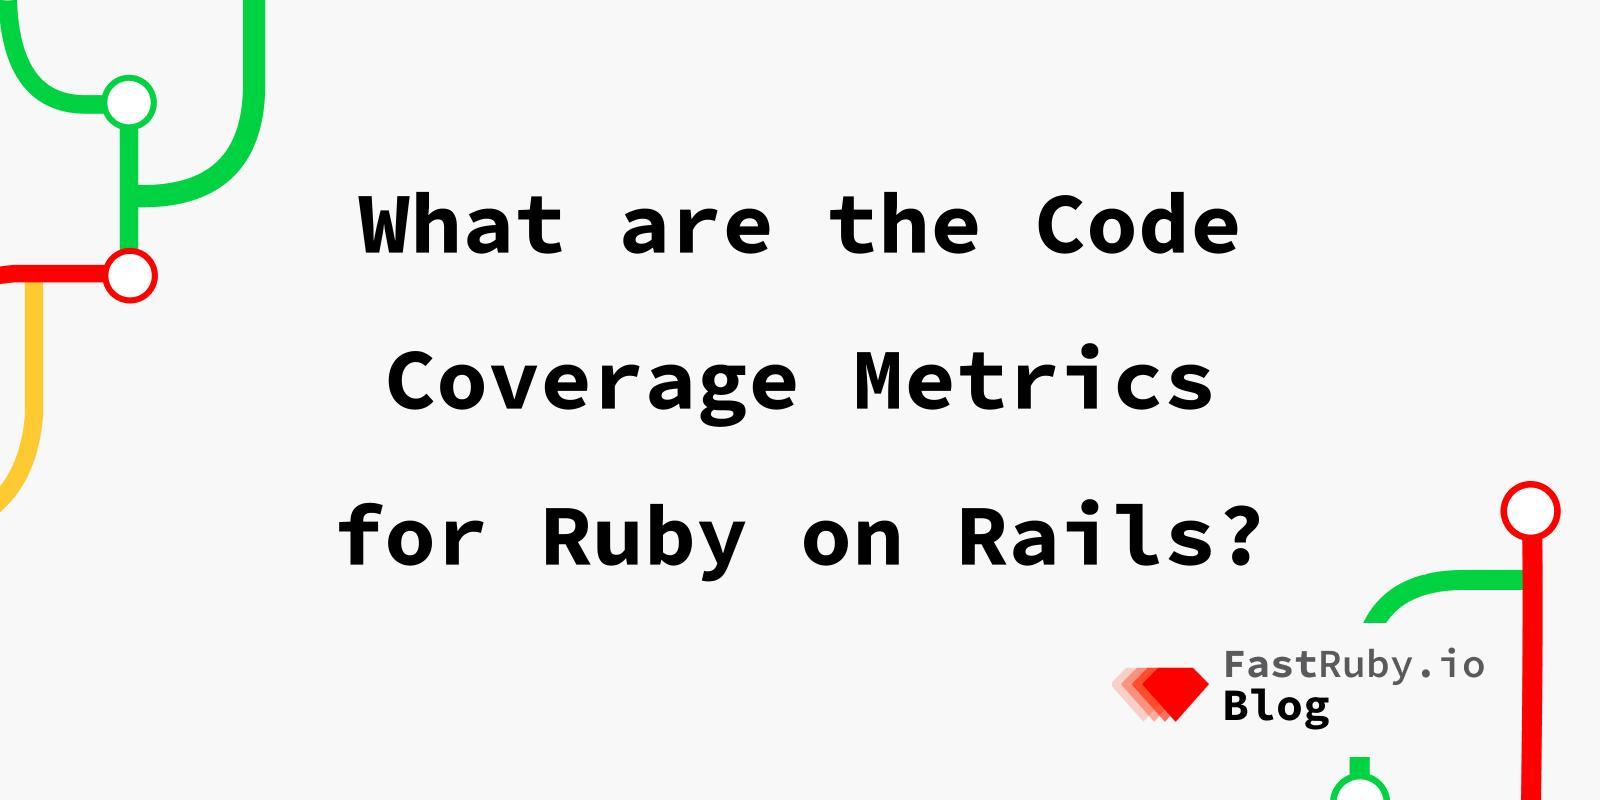 What are the Code Coverage Metrics for Ruby on Rails?